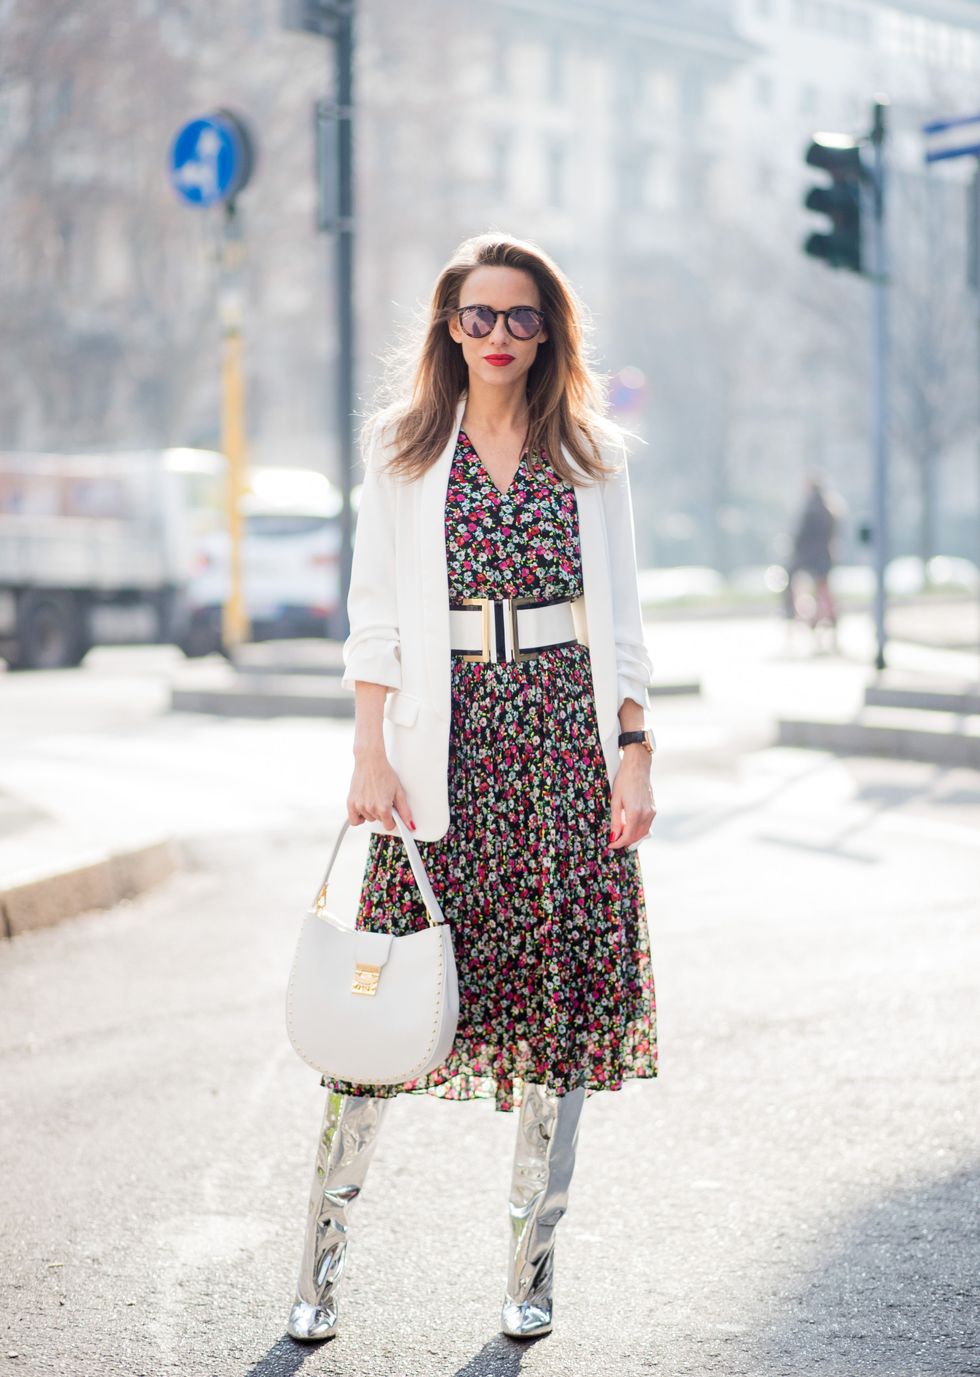 MILAN, ITALY - FEBRUARY 21: Alexandra Lapp wearing a long flower dress from H&amp;M, silver shiny boots by H&amp;M, a long white blazer from Zara, a lacquer waist belt in white and black from Balmain, a white Patricia Hobo bag with studs and sunglasses from Le Specs in pink seen during Milan Fashion Week Fall/Winter 2018/19 on February 21, 2018 in Milan, Italy. (Photo by Christian Vierig/Getty Images)